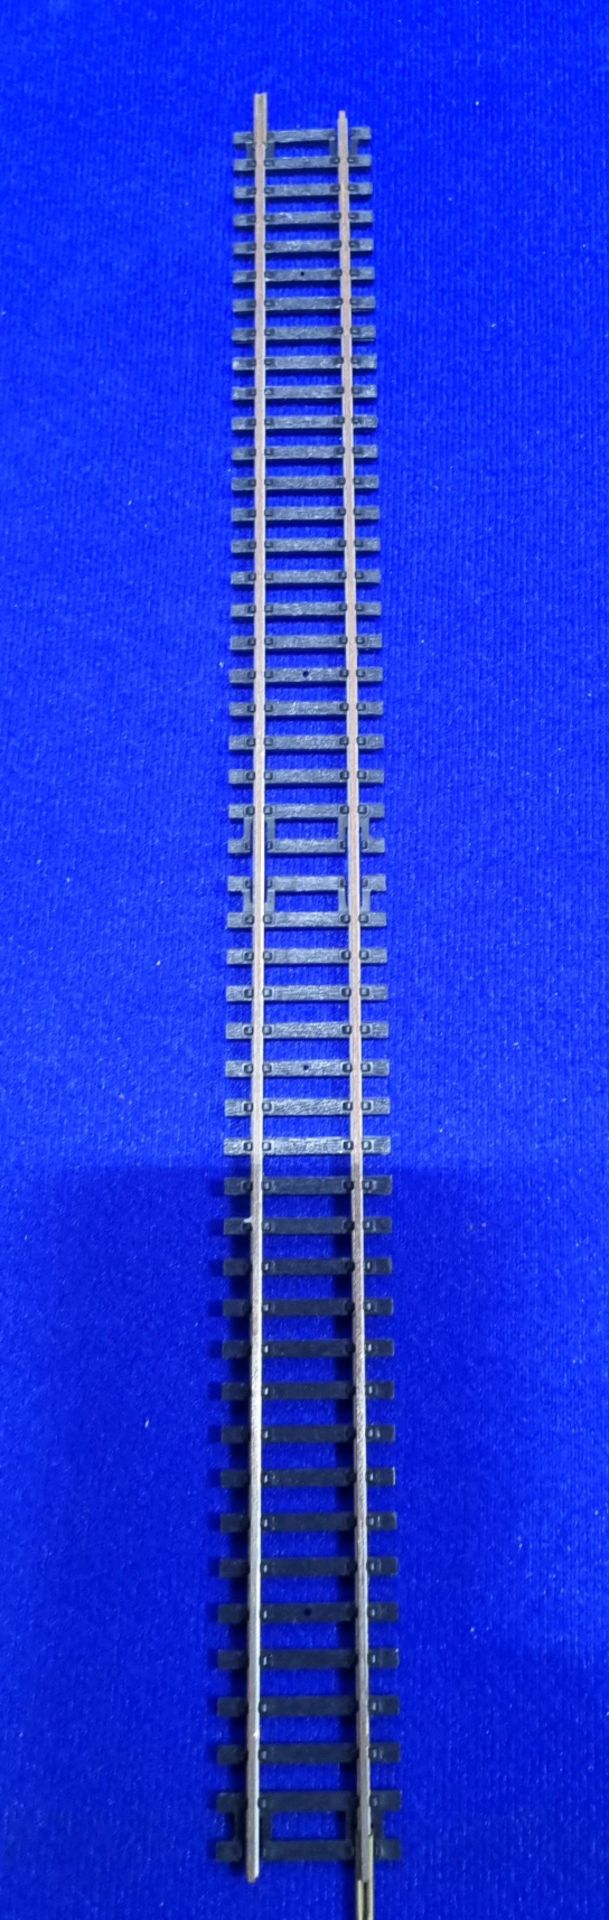 Various Pieces Of Trainset Trackage - Image 5 of 7